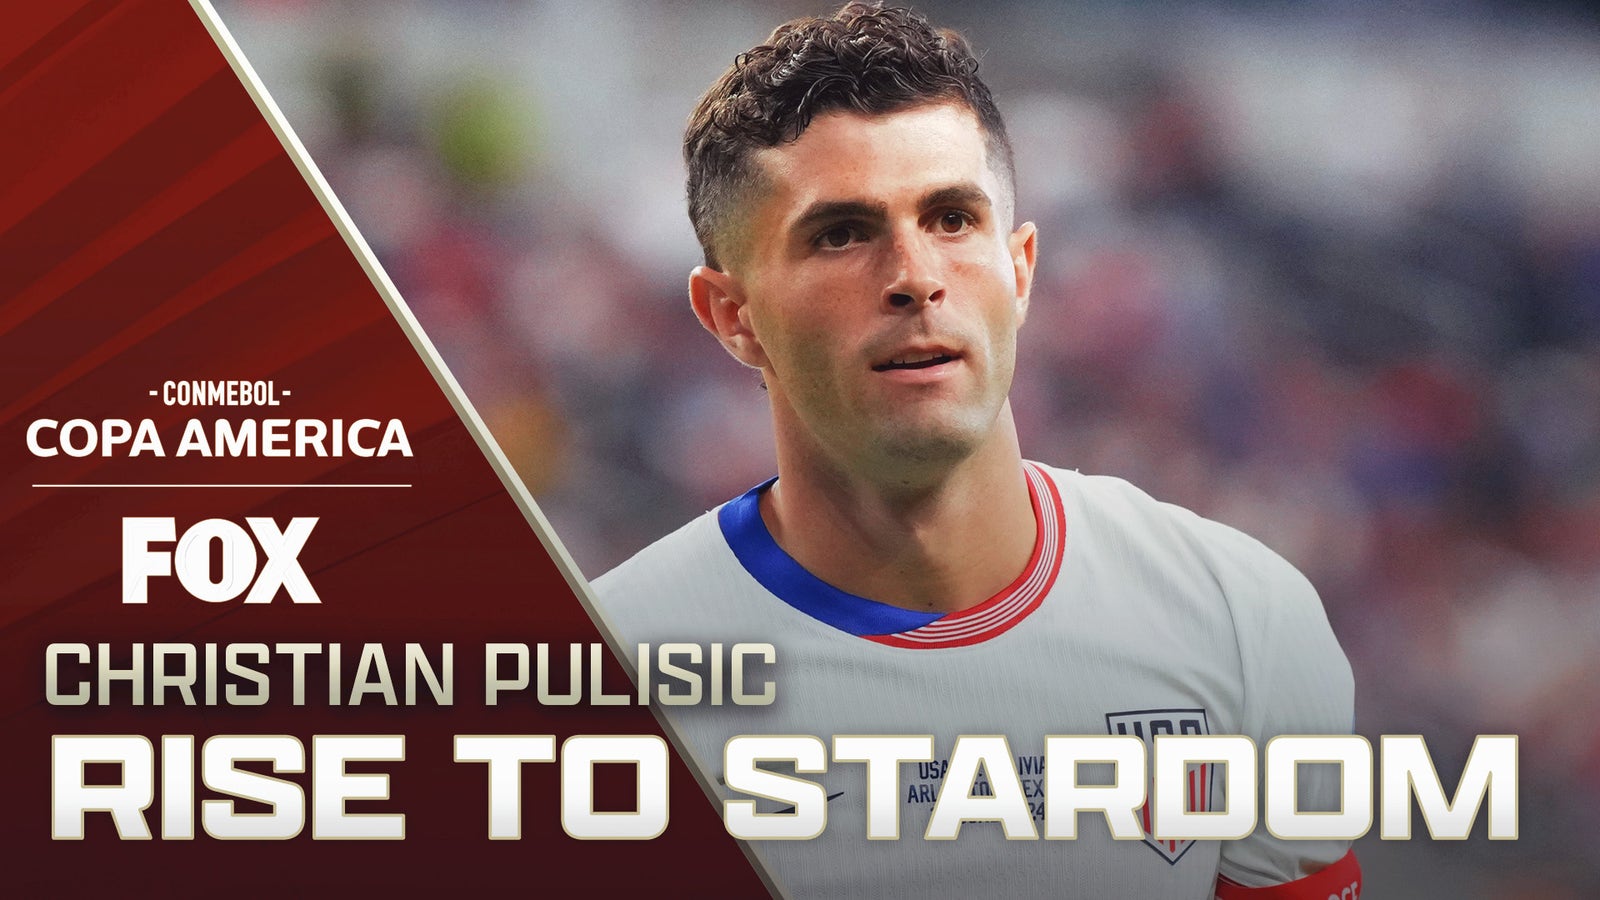 Christian Pulisic's rise to stardom with the USMNT, A.C. Milan